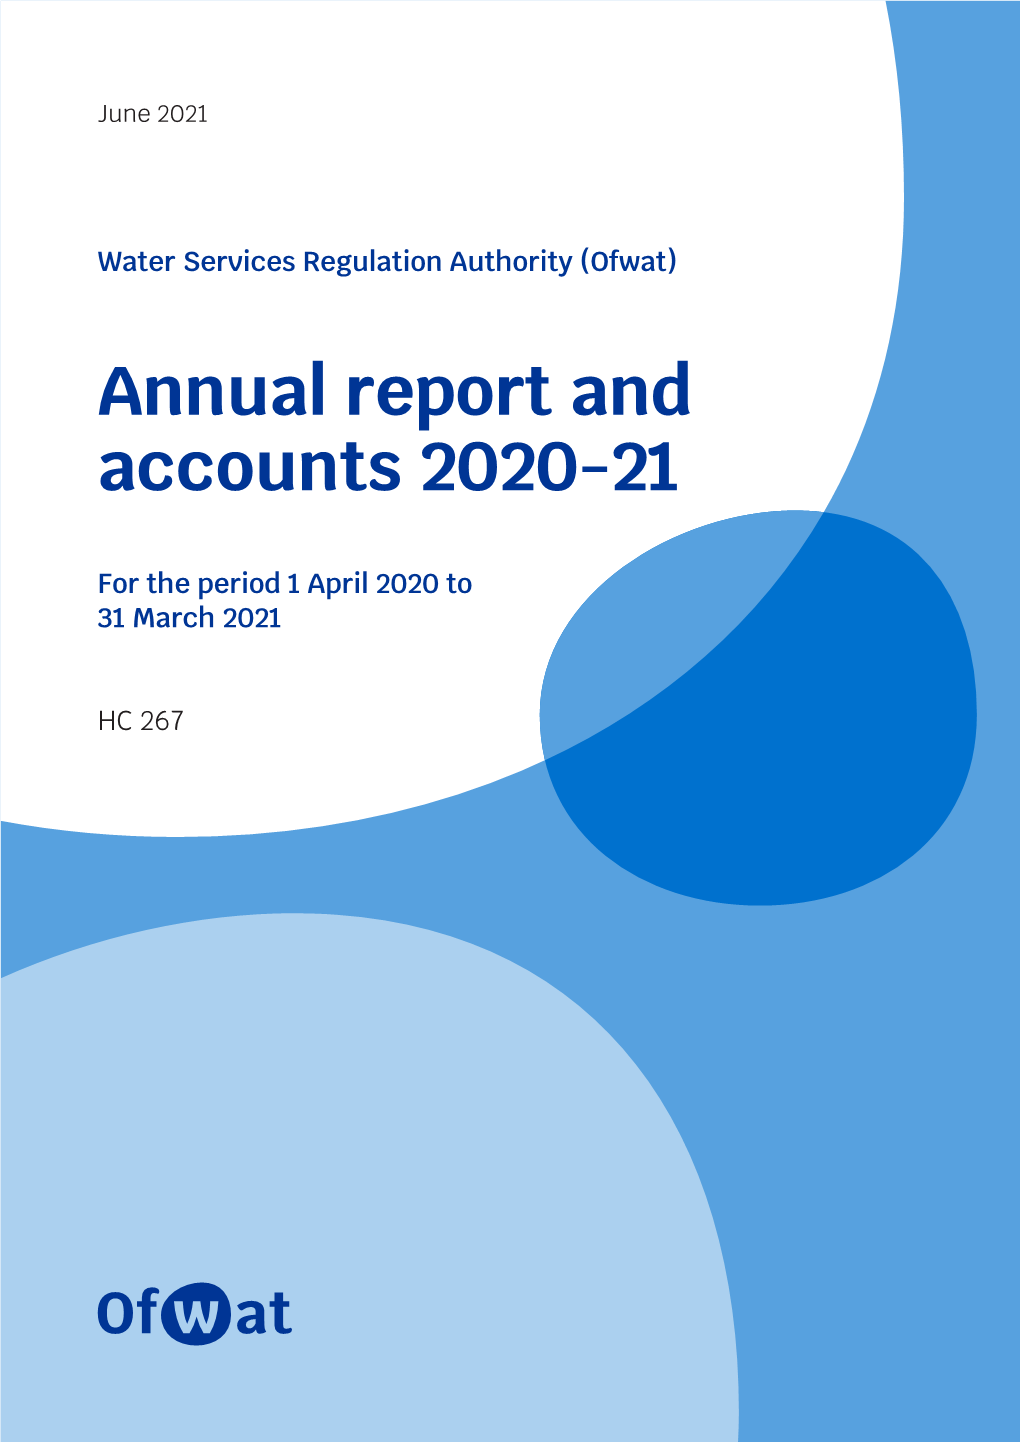 Water Services Regulation Authority (Ofwat) Annual Report and Accounts 2020-21 for the Period 1 April 2020 to 31 March 2021